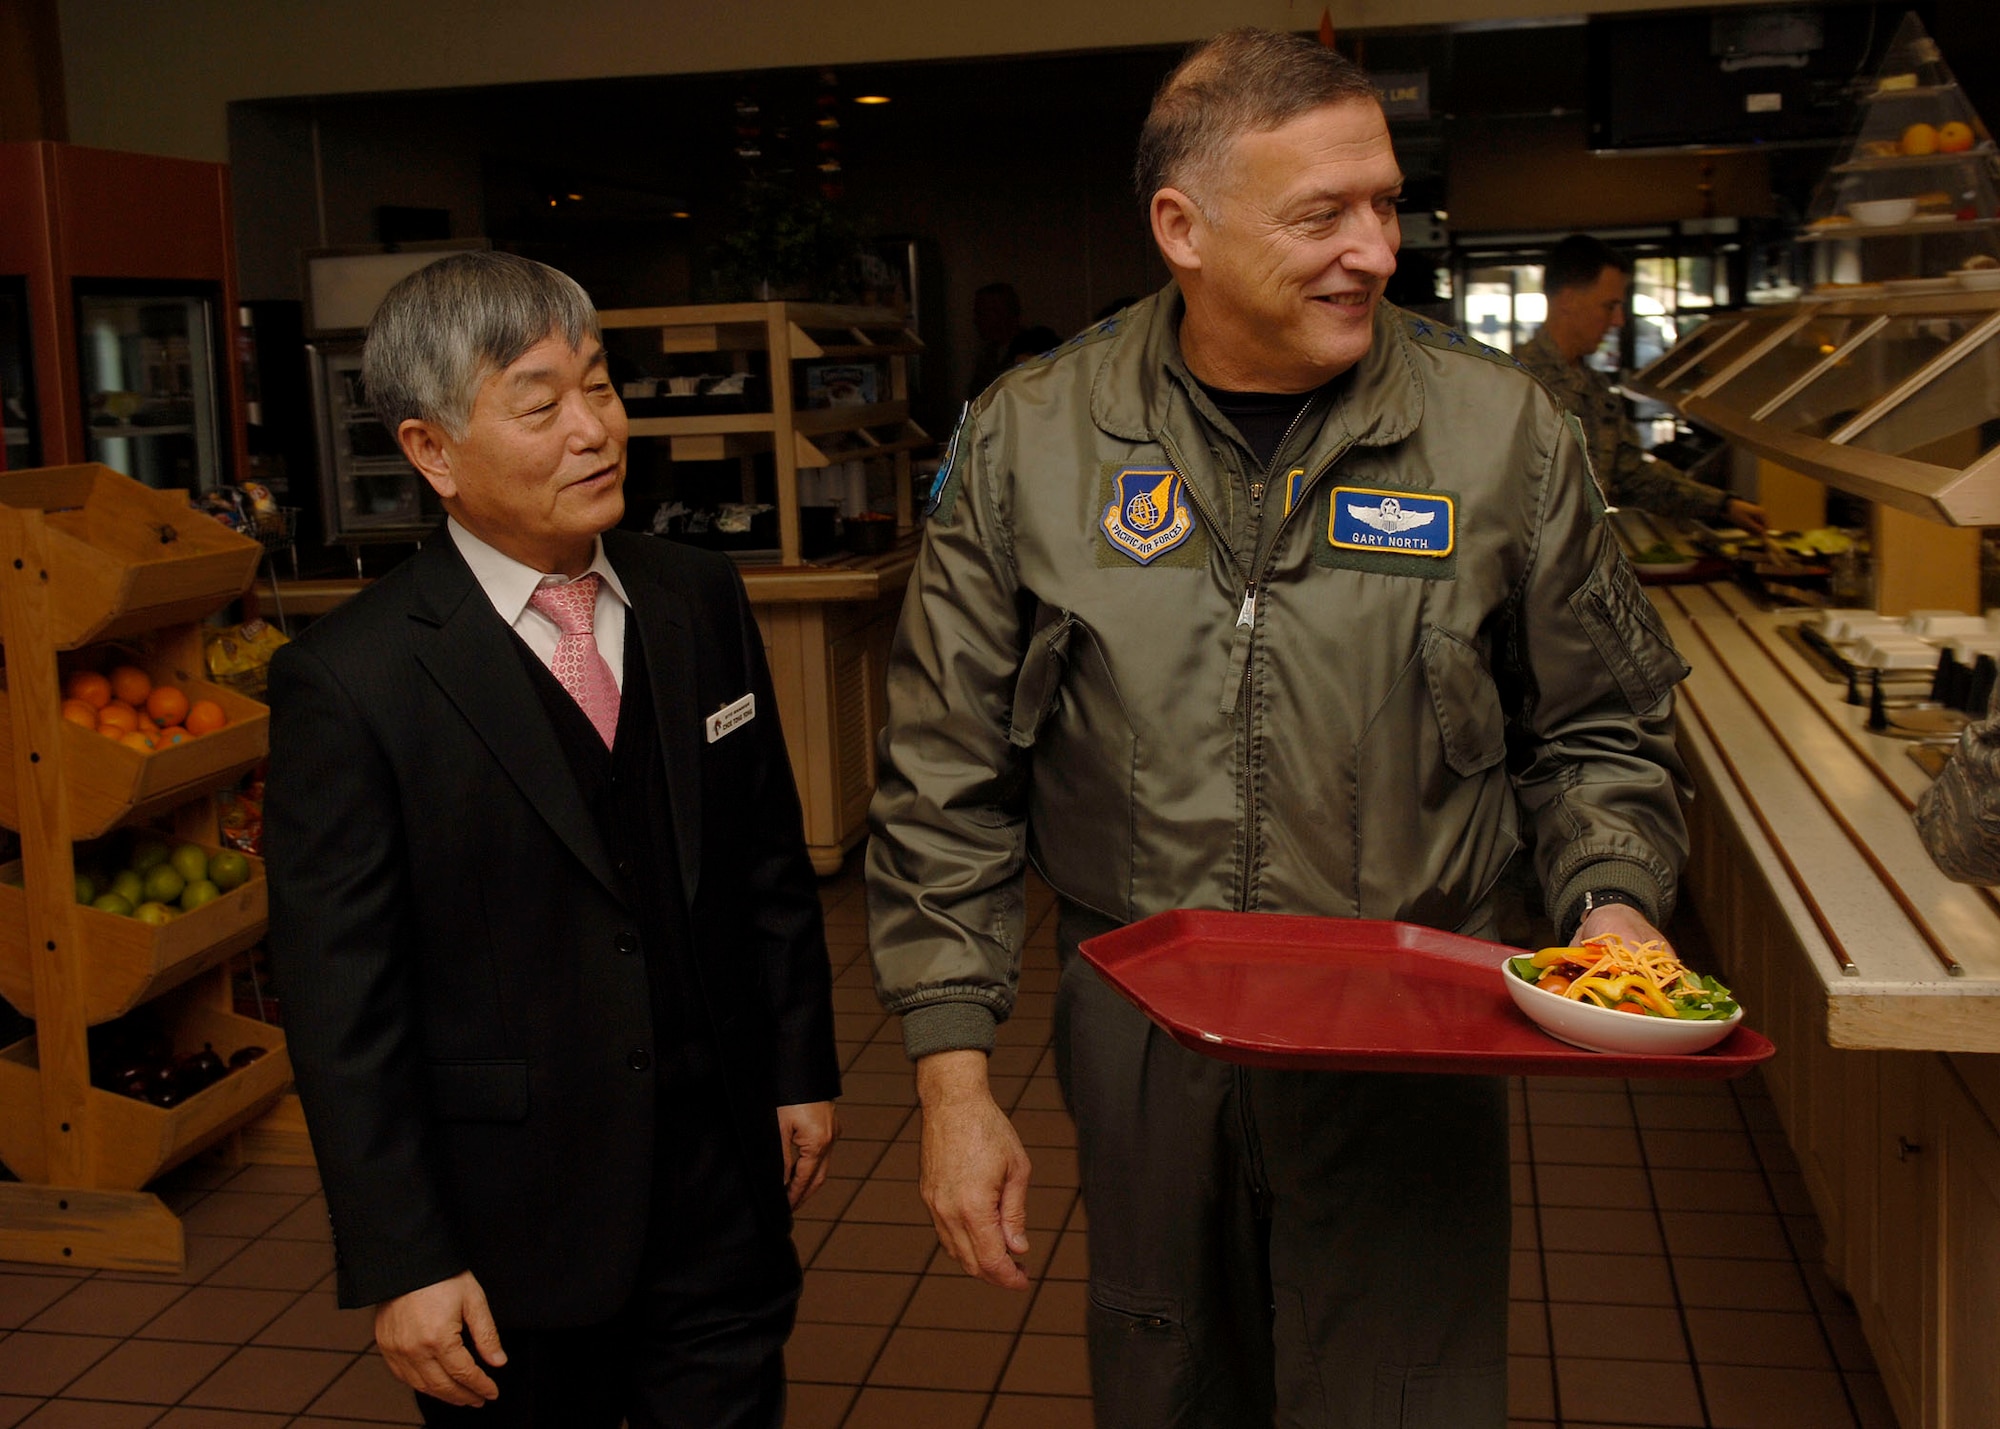 Choe Tong Yong, O’Malley Dining Facility manager, and Gen. Gary North, Pacific Air Forces commander, walk through the facility at Kunsan Air Base, Republic of Korea before they join 8th Fighter Wing Airmen for lunch Nov. 23. General North is sponsoring four civic leaders from the Air Force Civilian Advisory Council as they tour Kunsan and Osan Air Bases, ROK, Nov. 21-26. The purpose of the trip is for General North to celebrate Thanksgiving with the Airmen while the civic leaders gain a better understanding of life for Airmen assigned to the ROK. (U.S. Air Force photo/Tech. Sgt. Jerome S. Tayborn)  